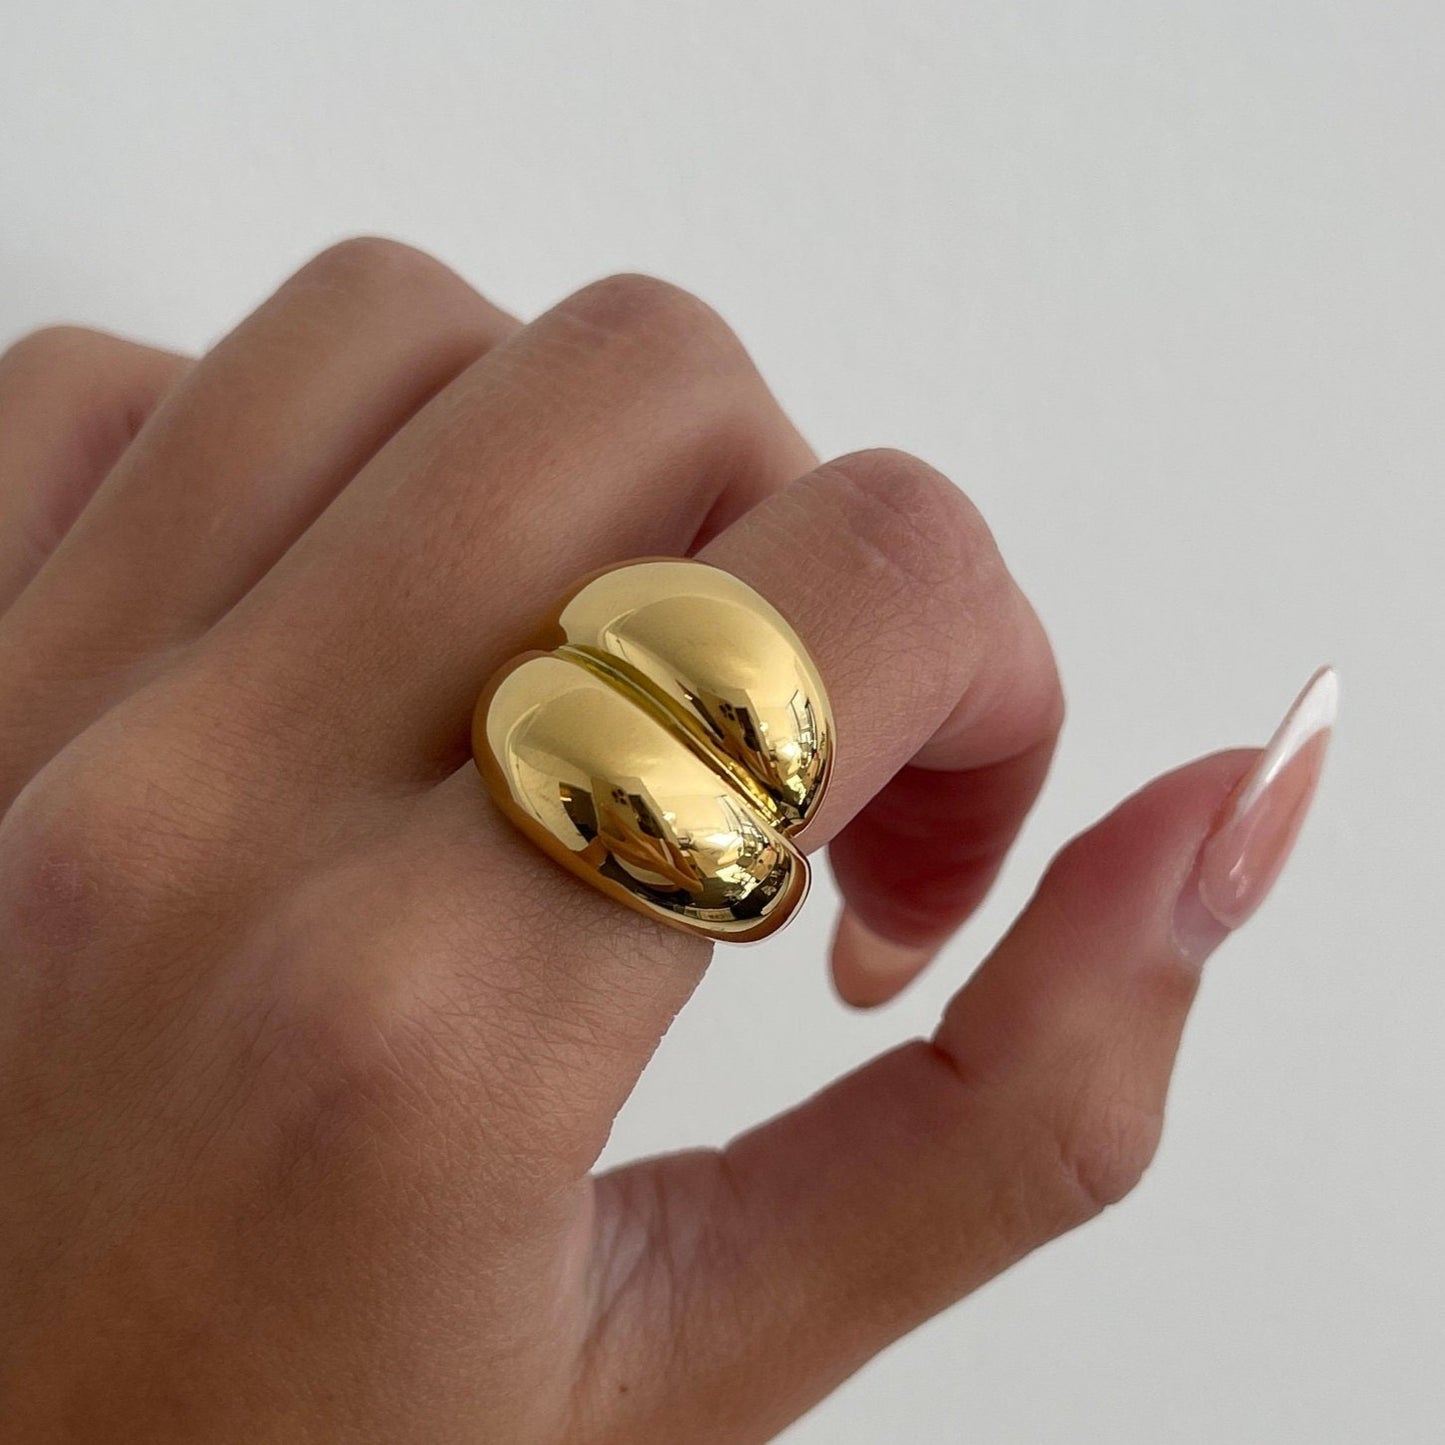 Gold Chunky Statement Dome Ring, large dome ring, minimalist ring, statement ring, dome bubble ring, modern dome ring, silver dome ring bold